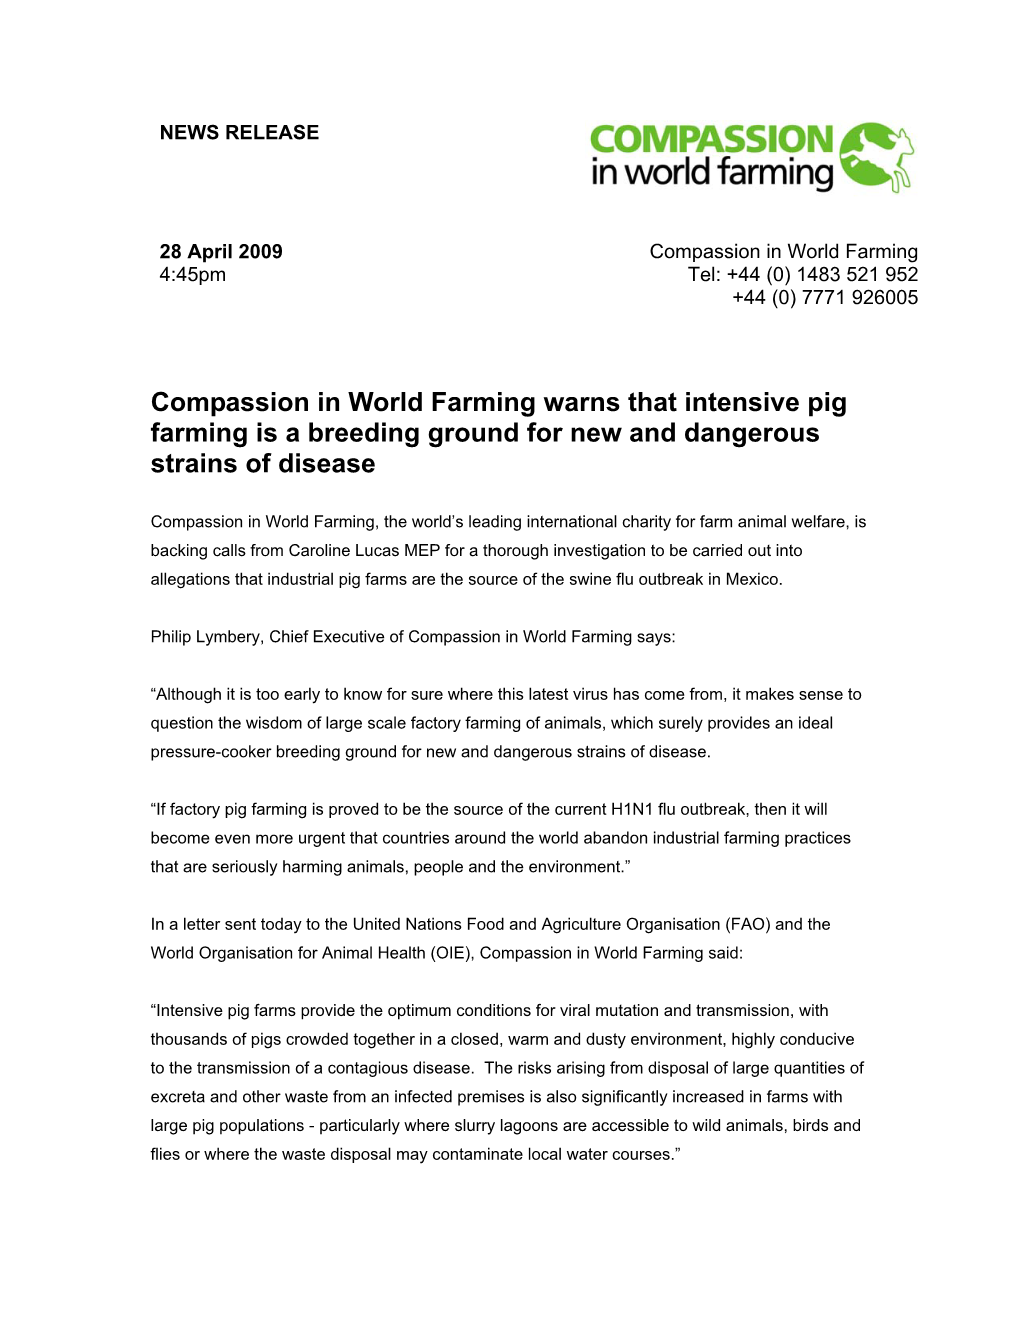 Compassion in World Farming Warns That Intensive Pig Farming Is a Breeding Ground for New and Dangerous Strains of Disease